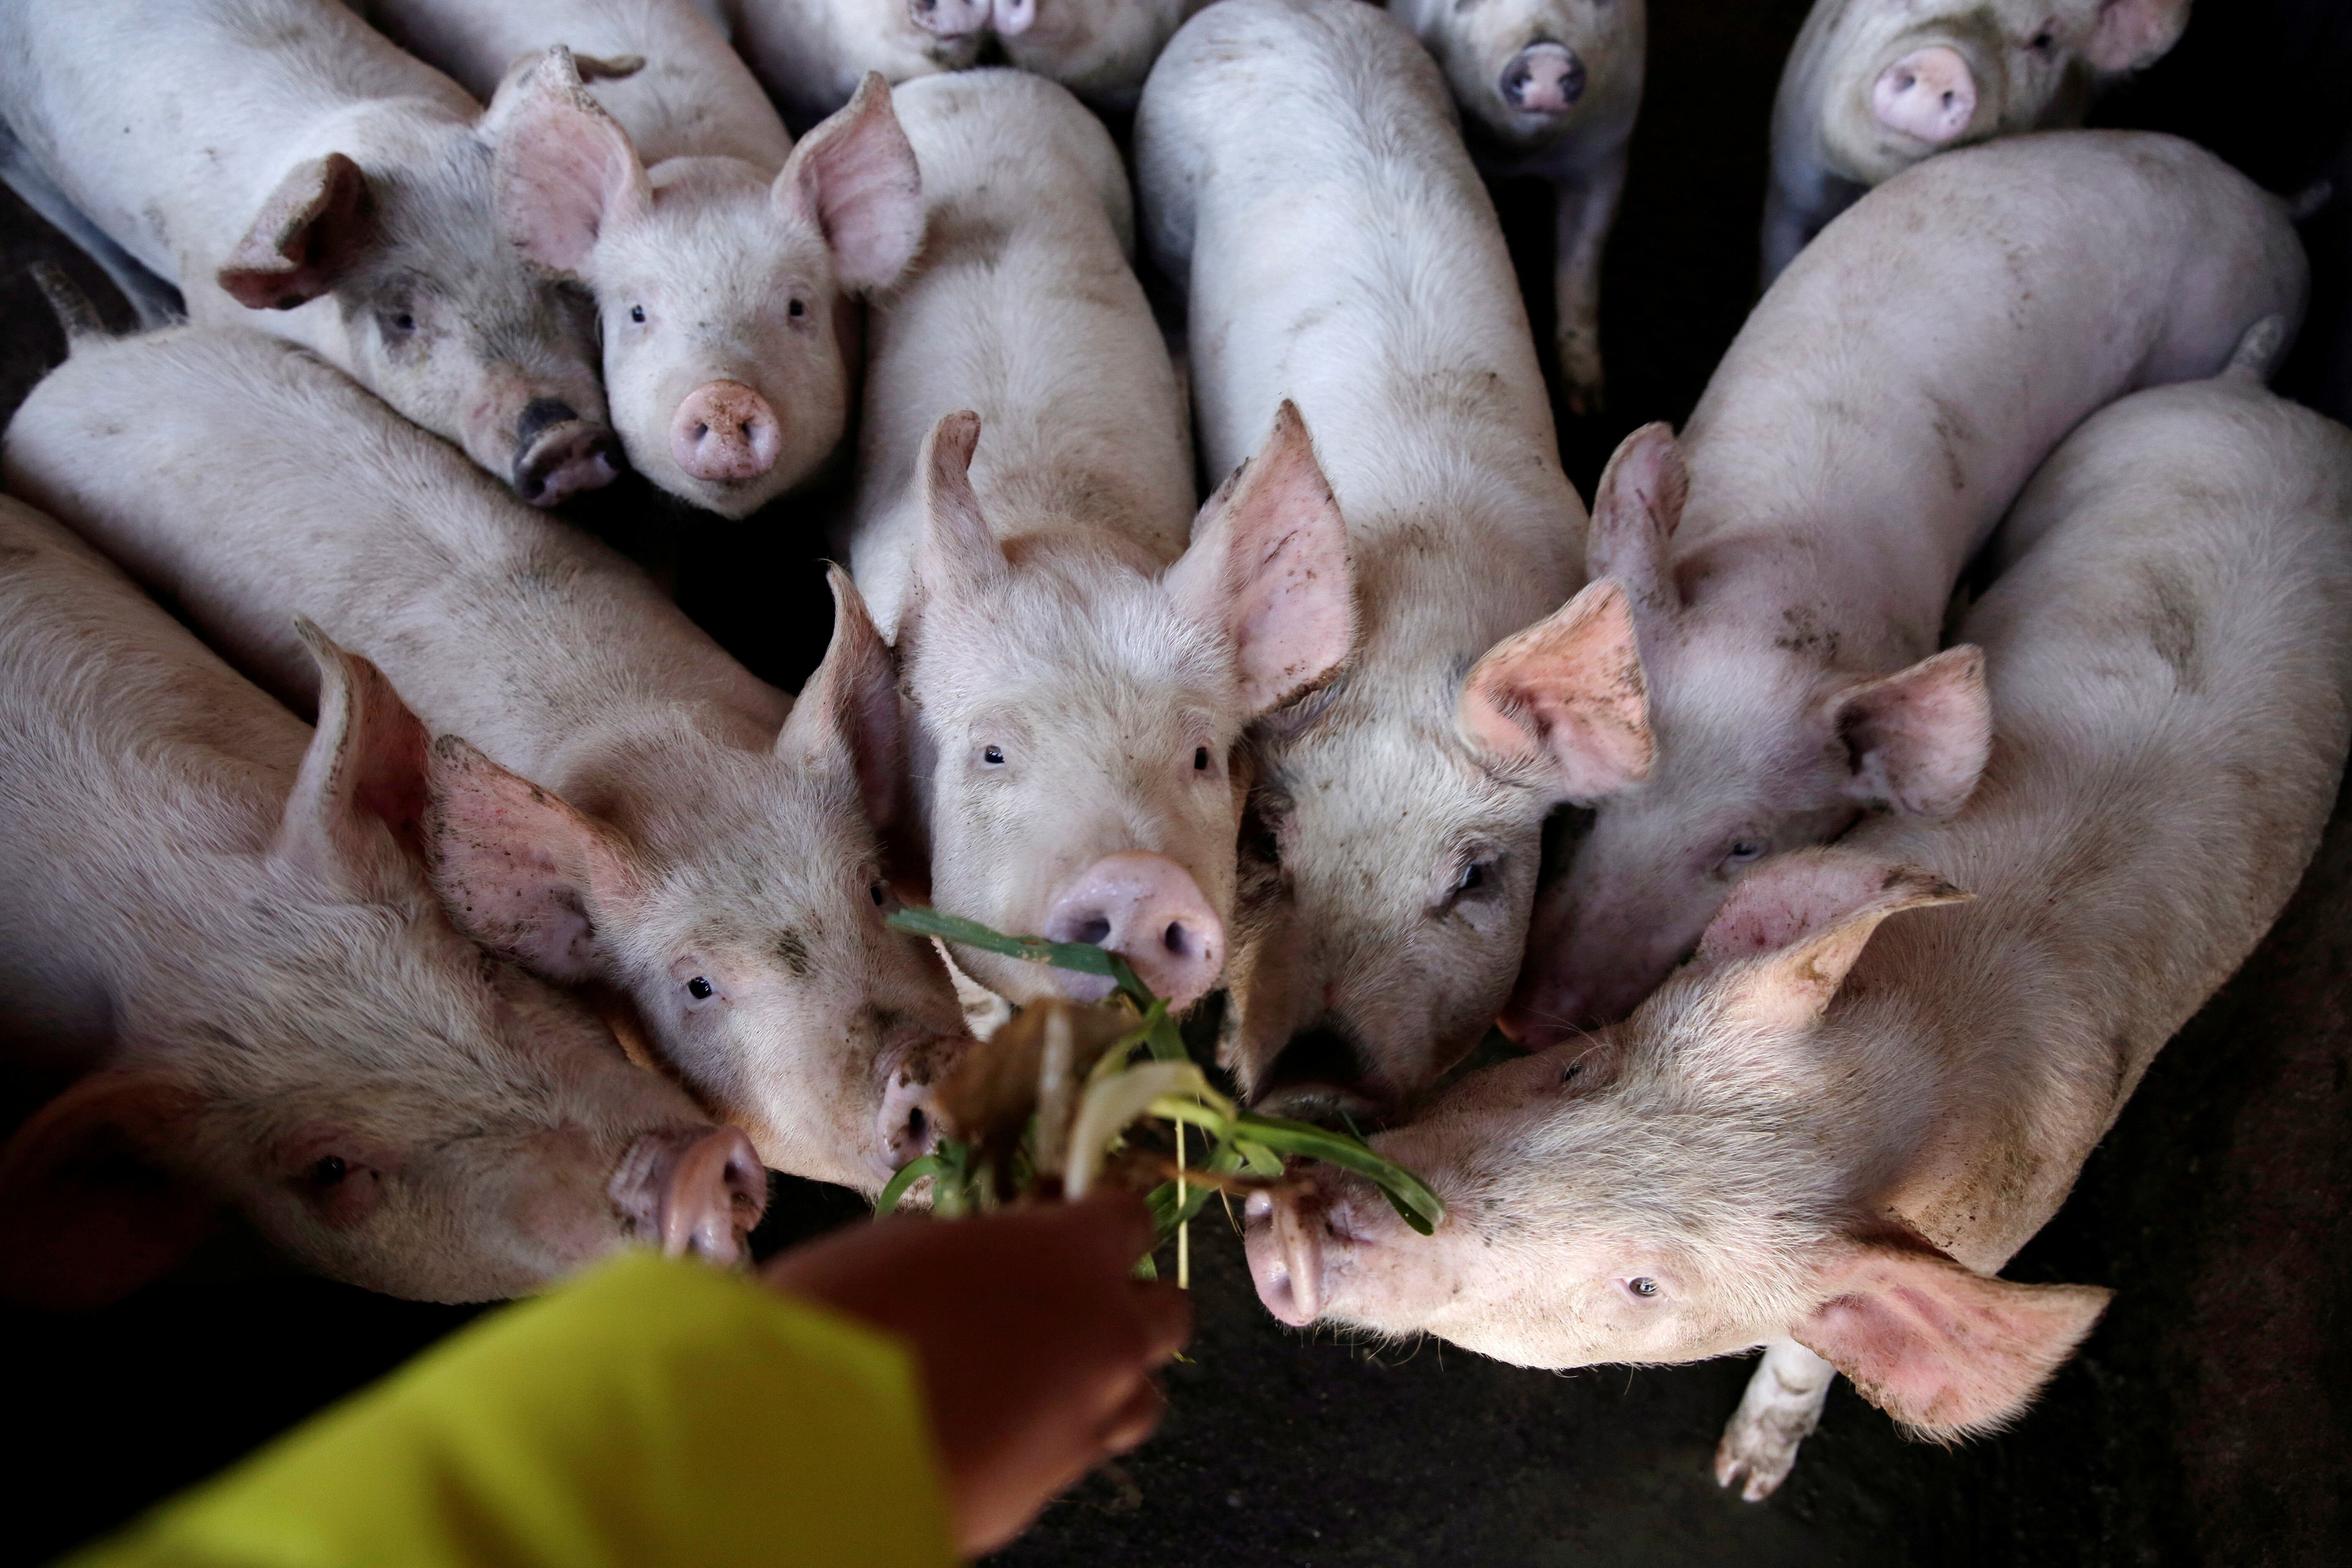 The impact of the obese hogs on pork prices is being complicated by new rules that prohibit the transport of live pigs across the boundaries of five areas in China because of African swine fever. Photo: Reuters